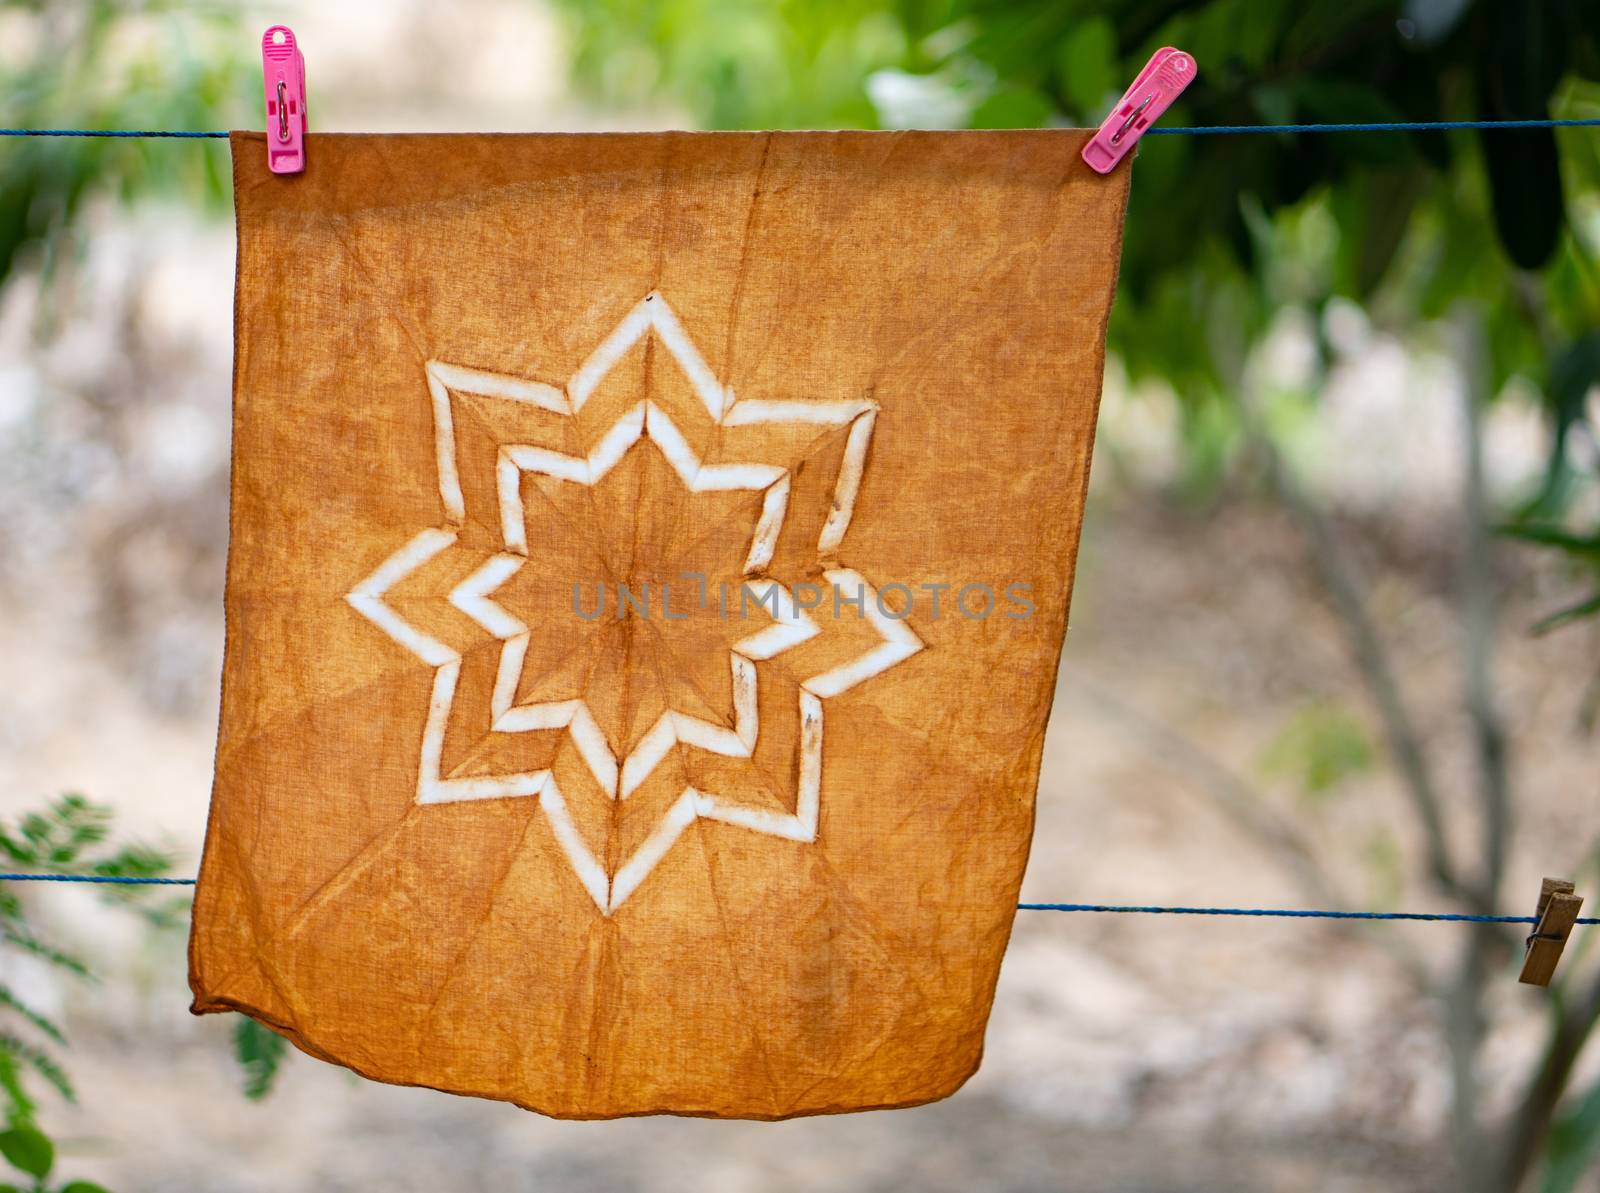 Hand-dyed batik cloth hanging in the outdoor garden.